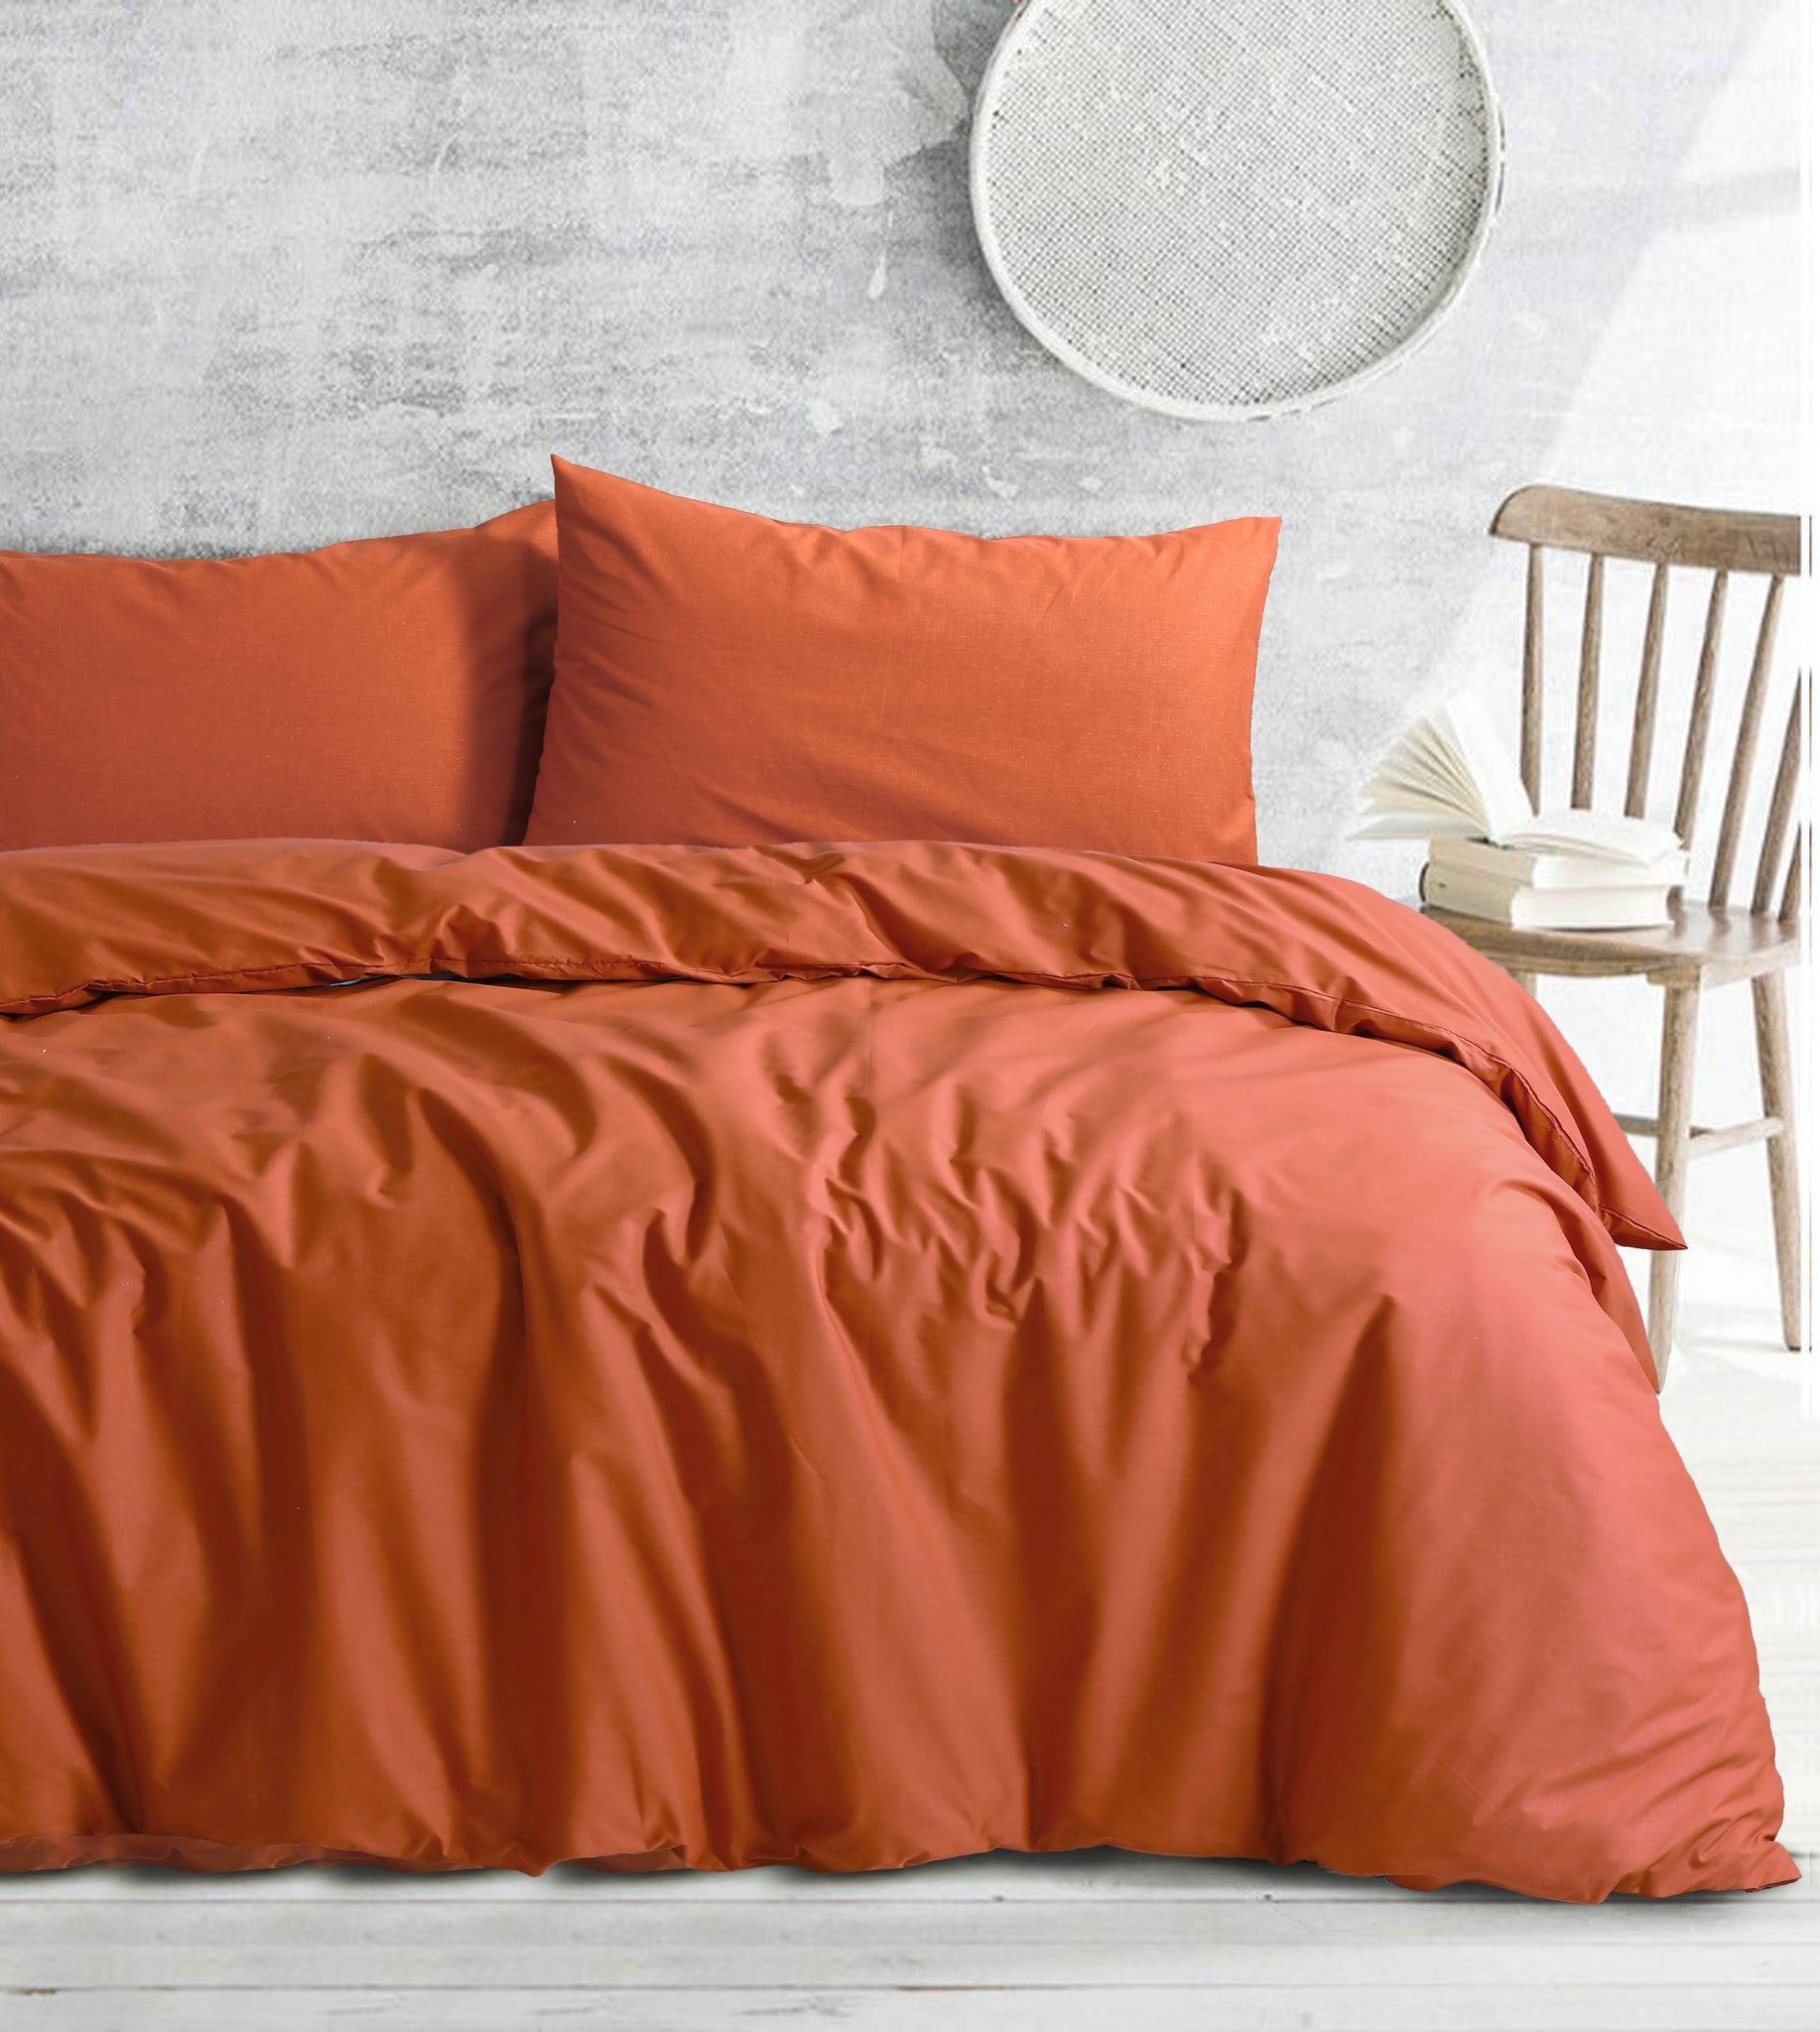 Amsons Royale Cotton Queen Quilt Duvet Doona Cover Set with Europeon pillowcases - Rust